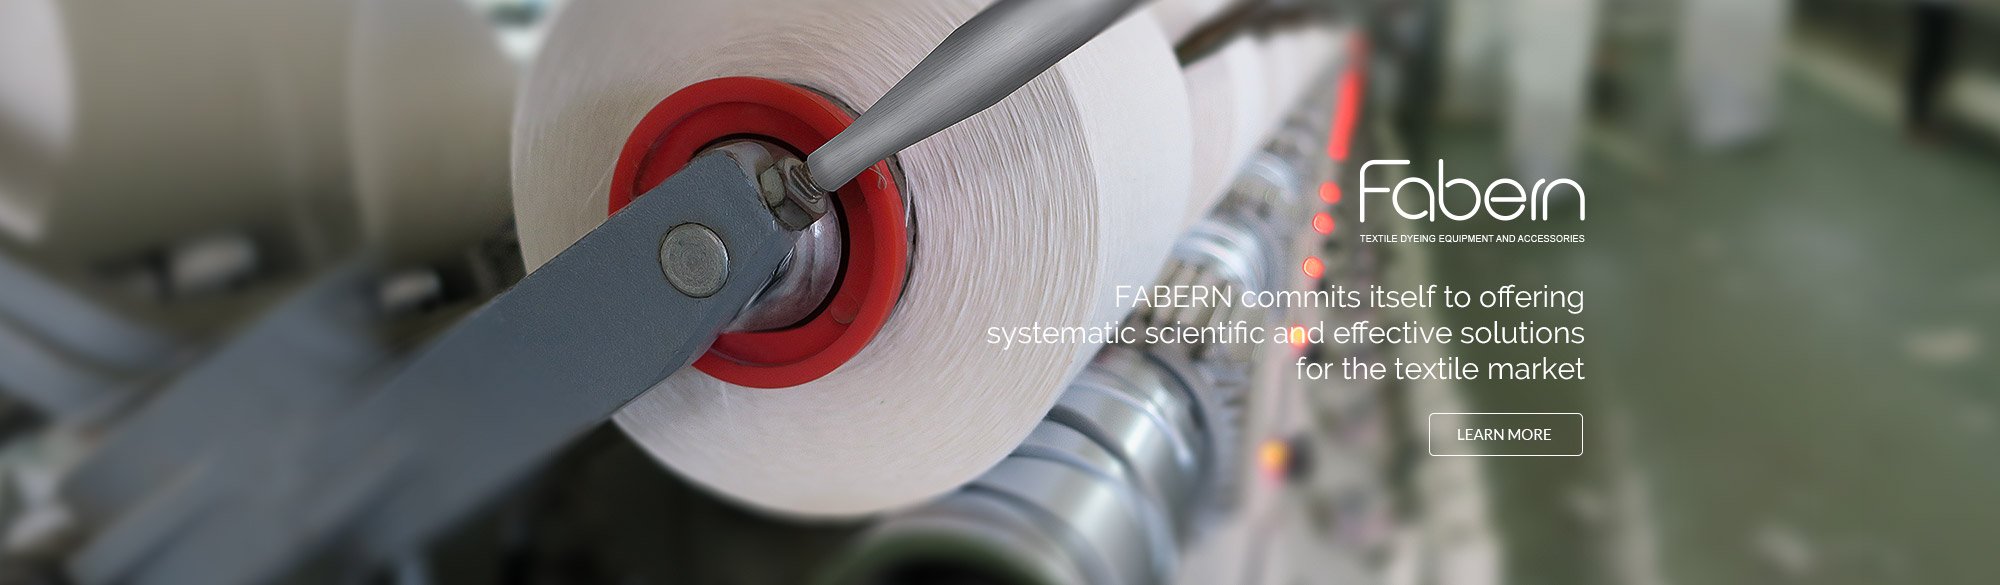 FABERN commits itself to offering systematic scientific and effective solutions for the textile market